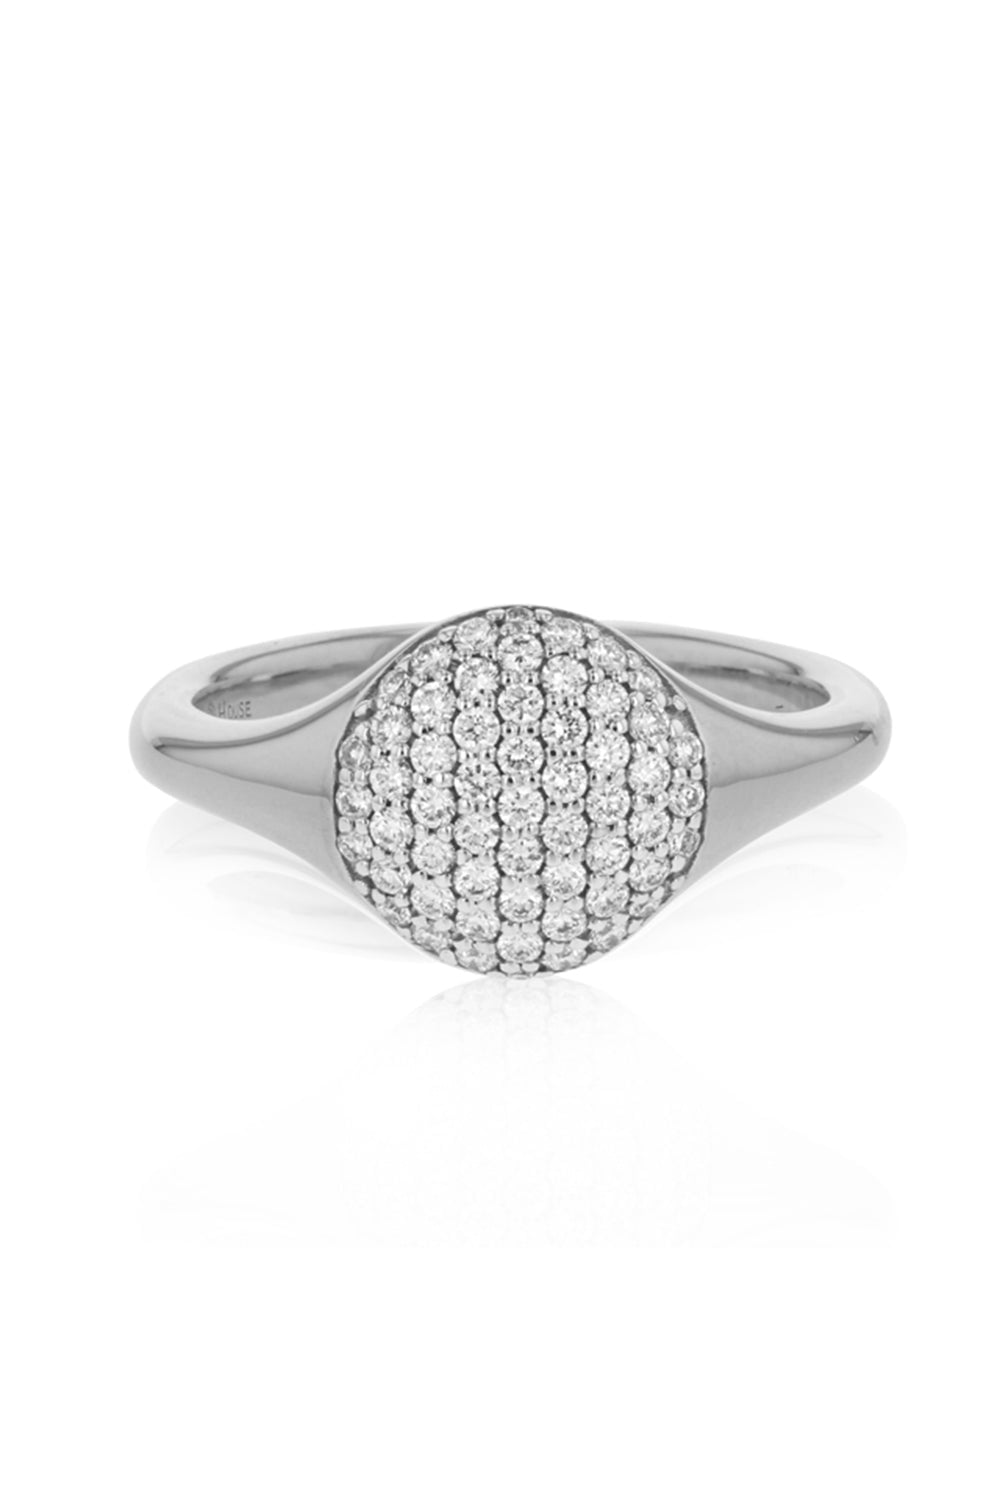 PHILLIPS HOUSE-Inifinity Diamond Stack Ring-WHITE GOLD